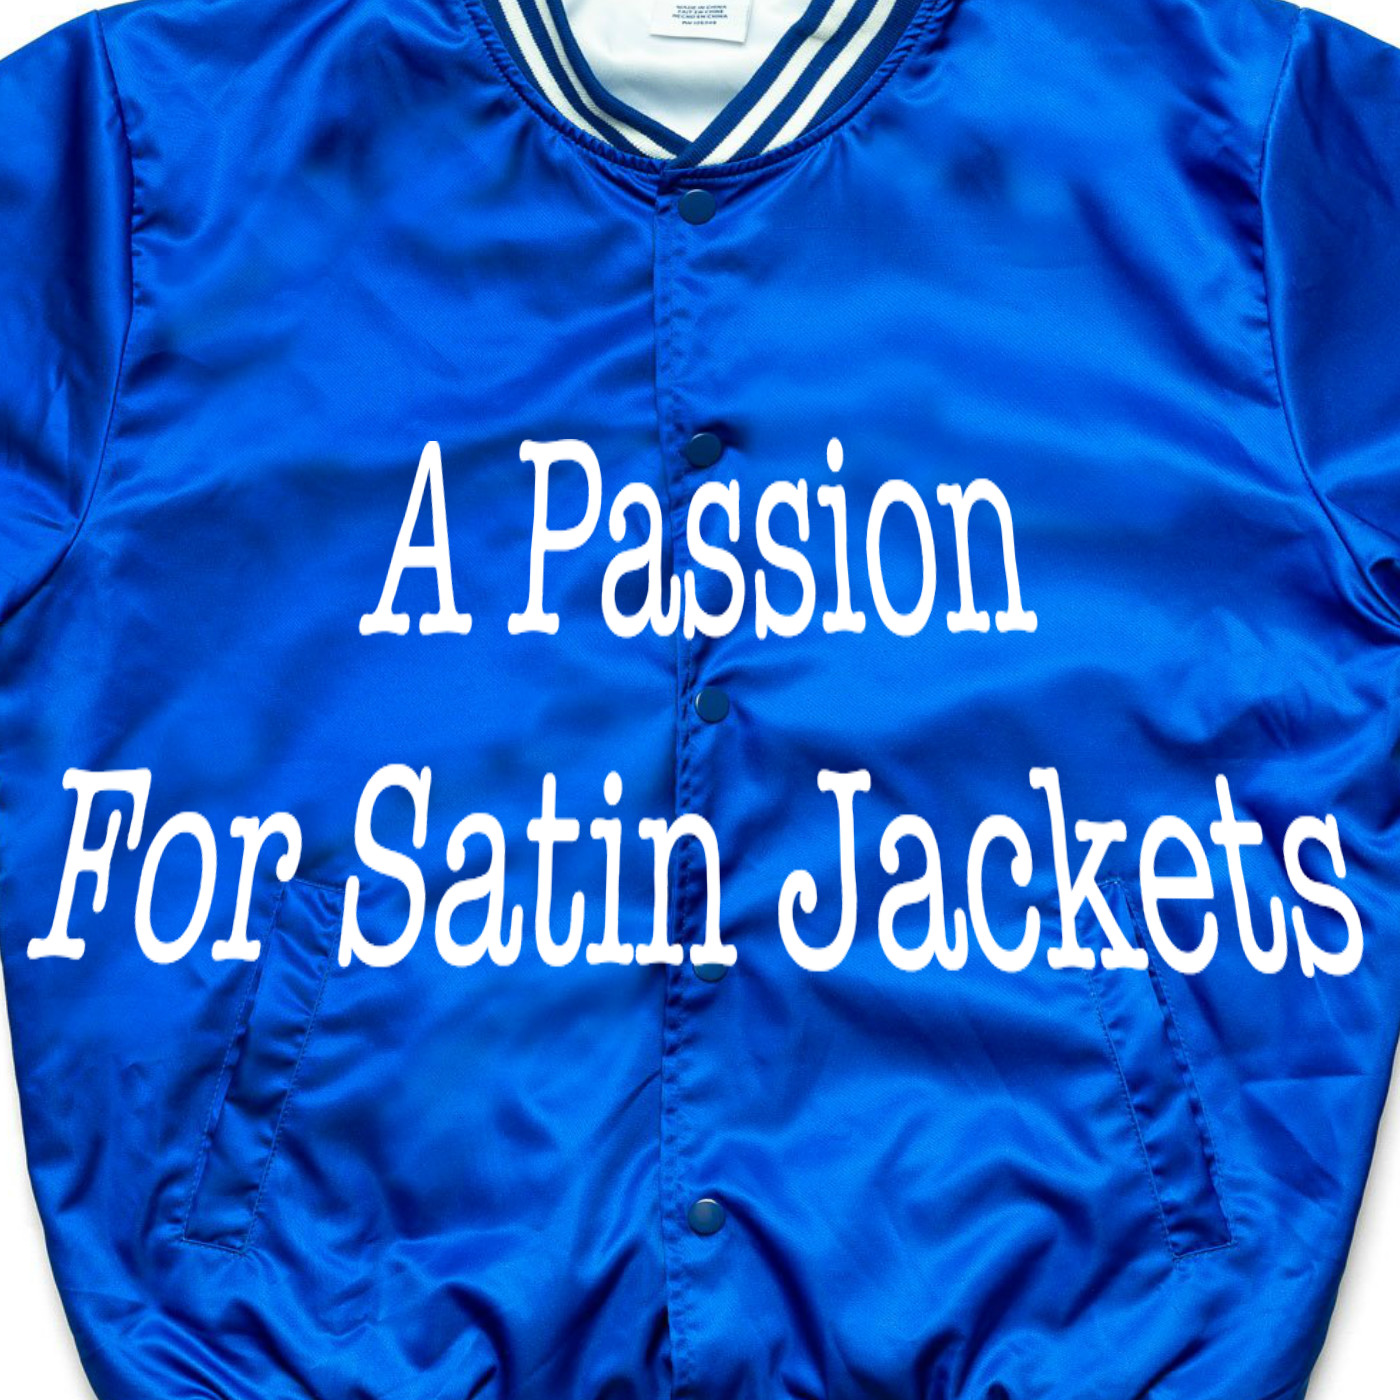 S6:E13 - A Passion for Satin Jackets